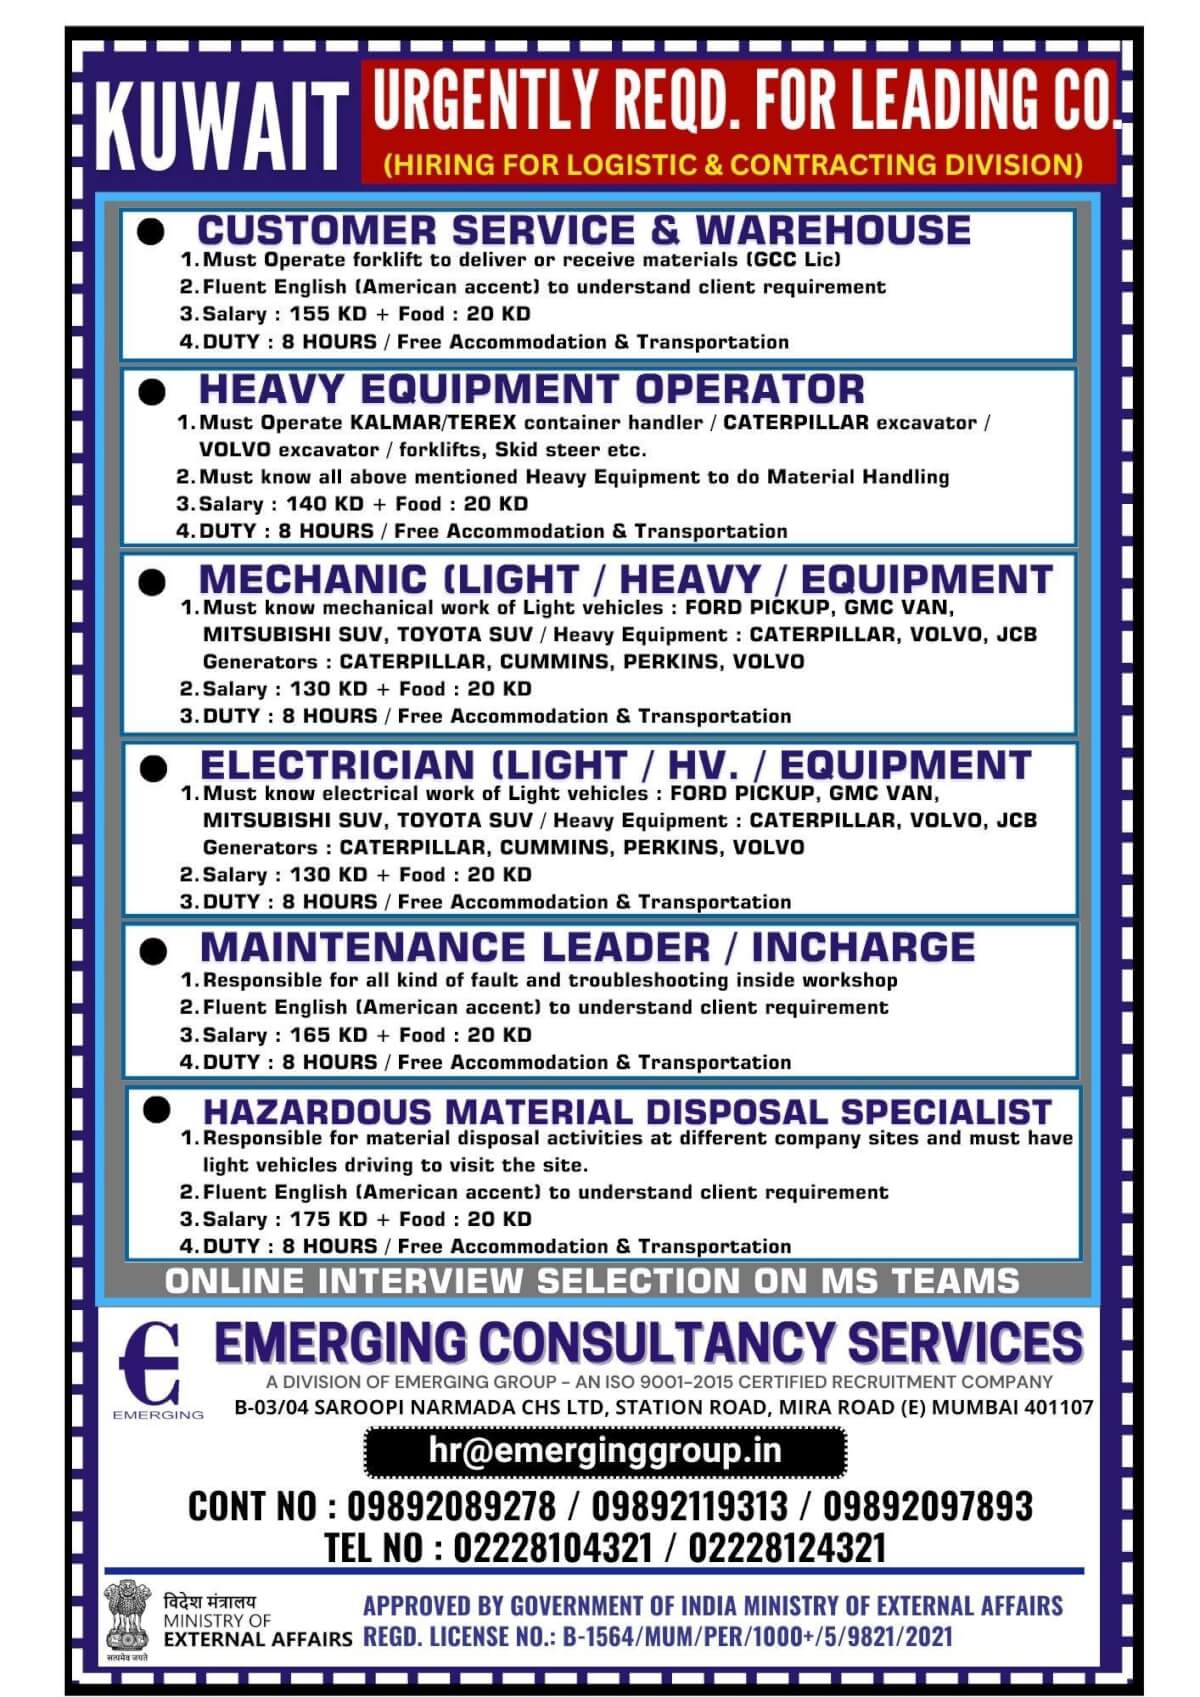 Urgently Required for Leading Company in KUWAIT